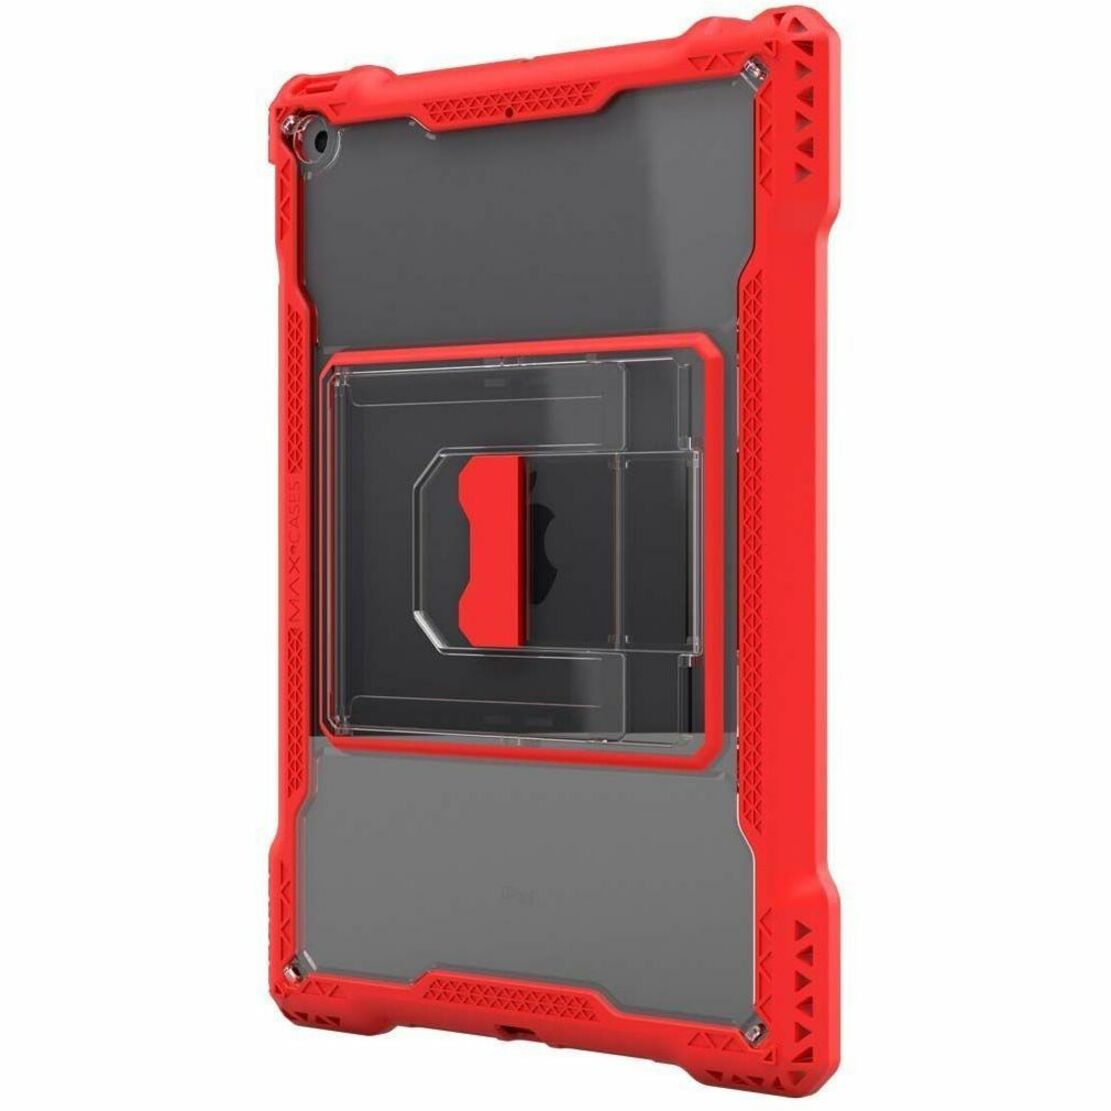 MAXCases AP-SXX-IP7-19-RED Shield Extreme-X for iPad 7 10.2" (Red), Rugged, Shock Absorbing, Scratch Resistant, Impact Resistant, Anti-slip